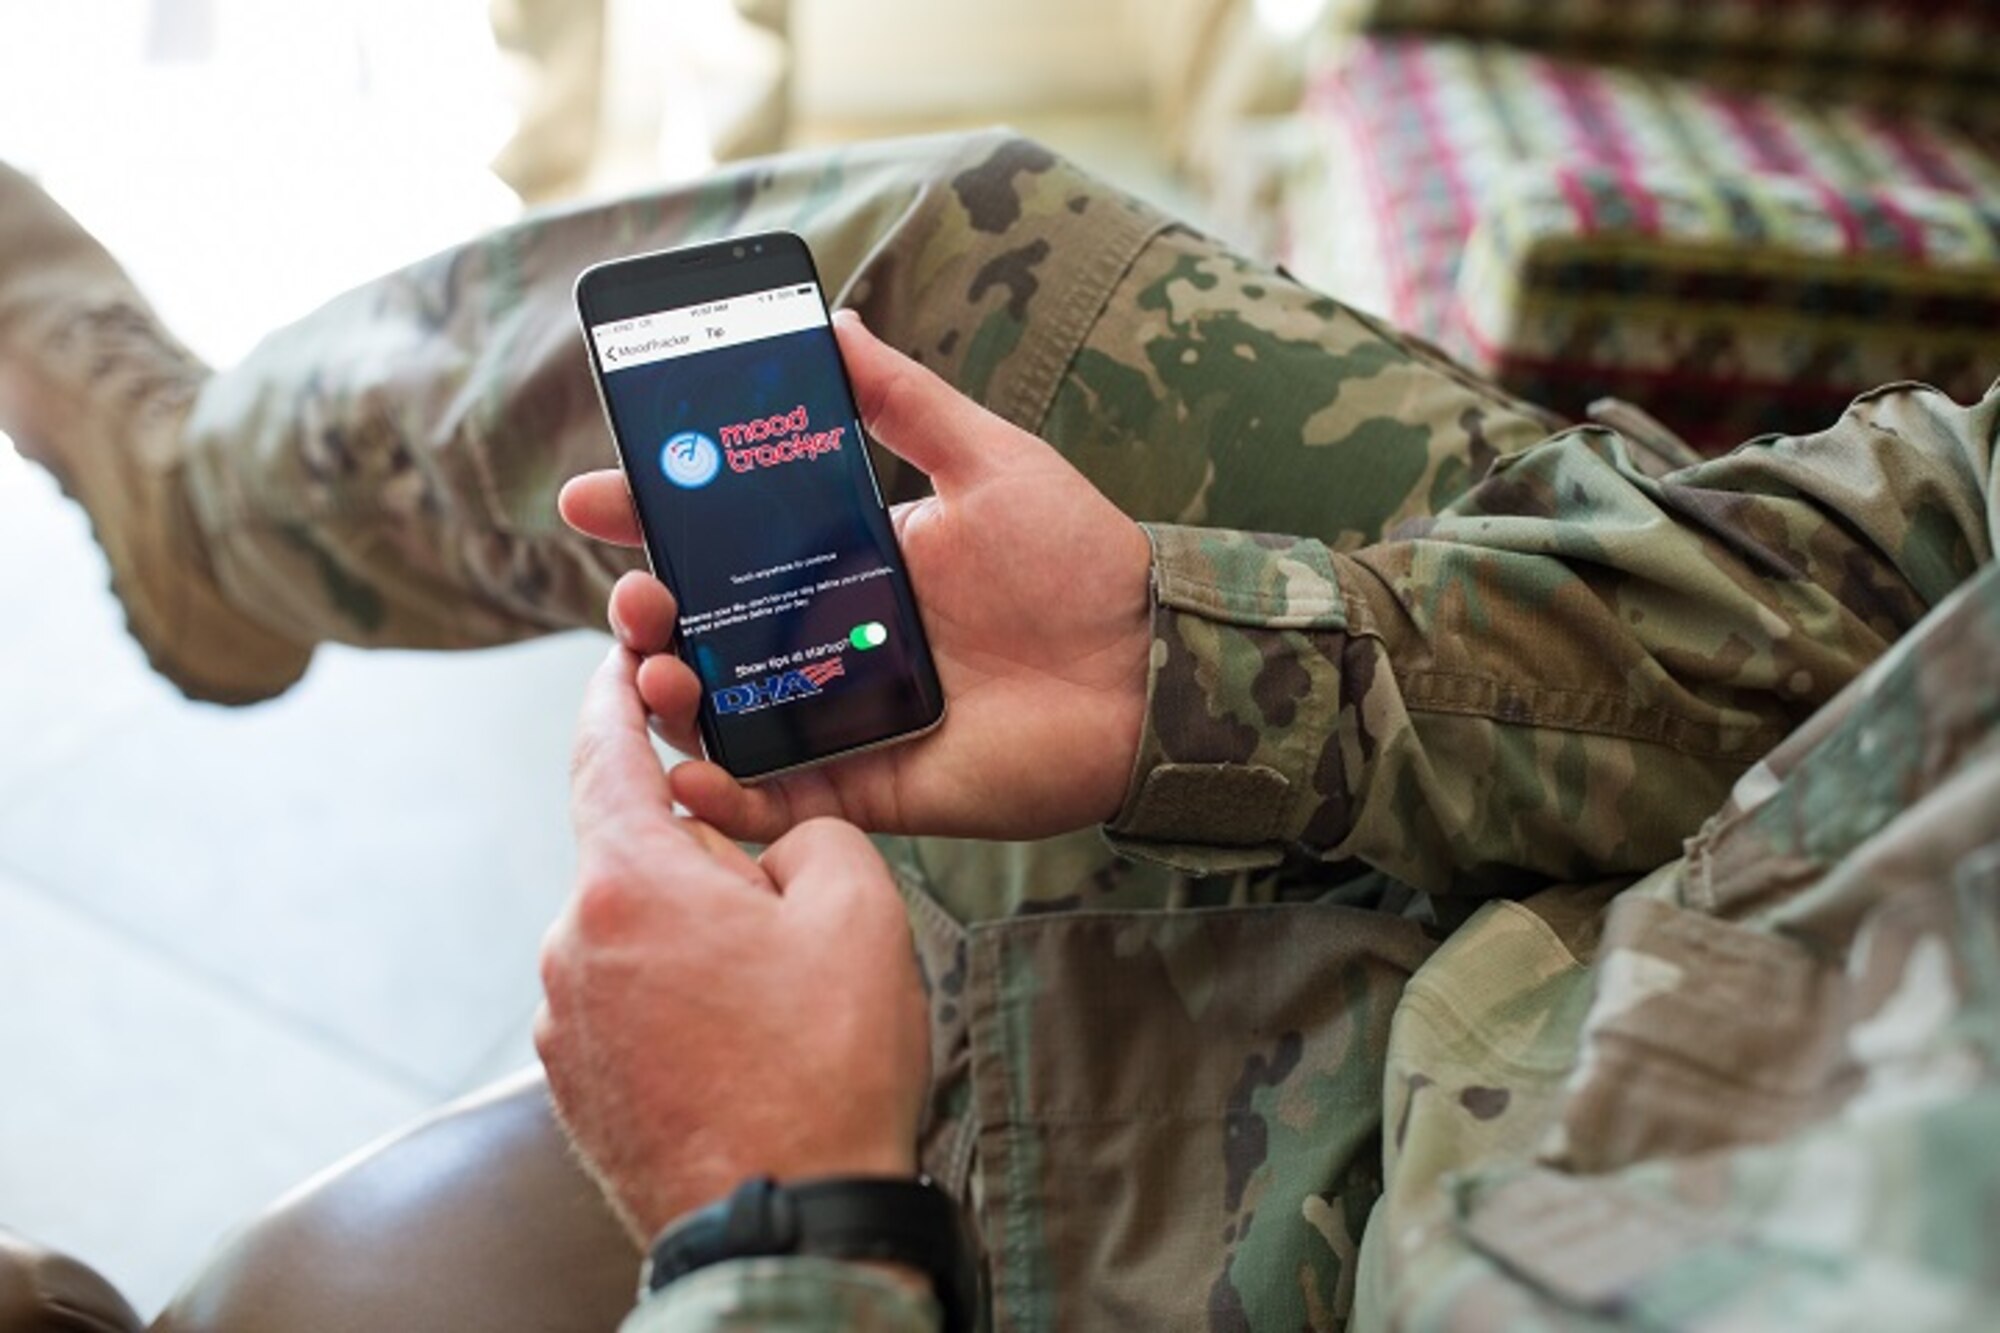 An Army health care provider loads the T2 Mood Tracker mobile app on a mobile device for a demonstration for his patients.